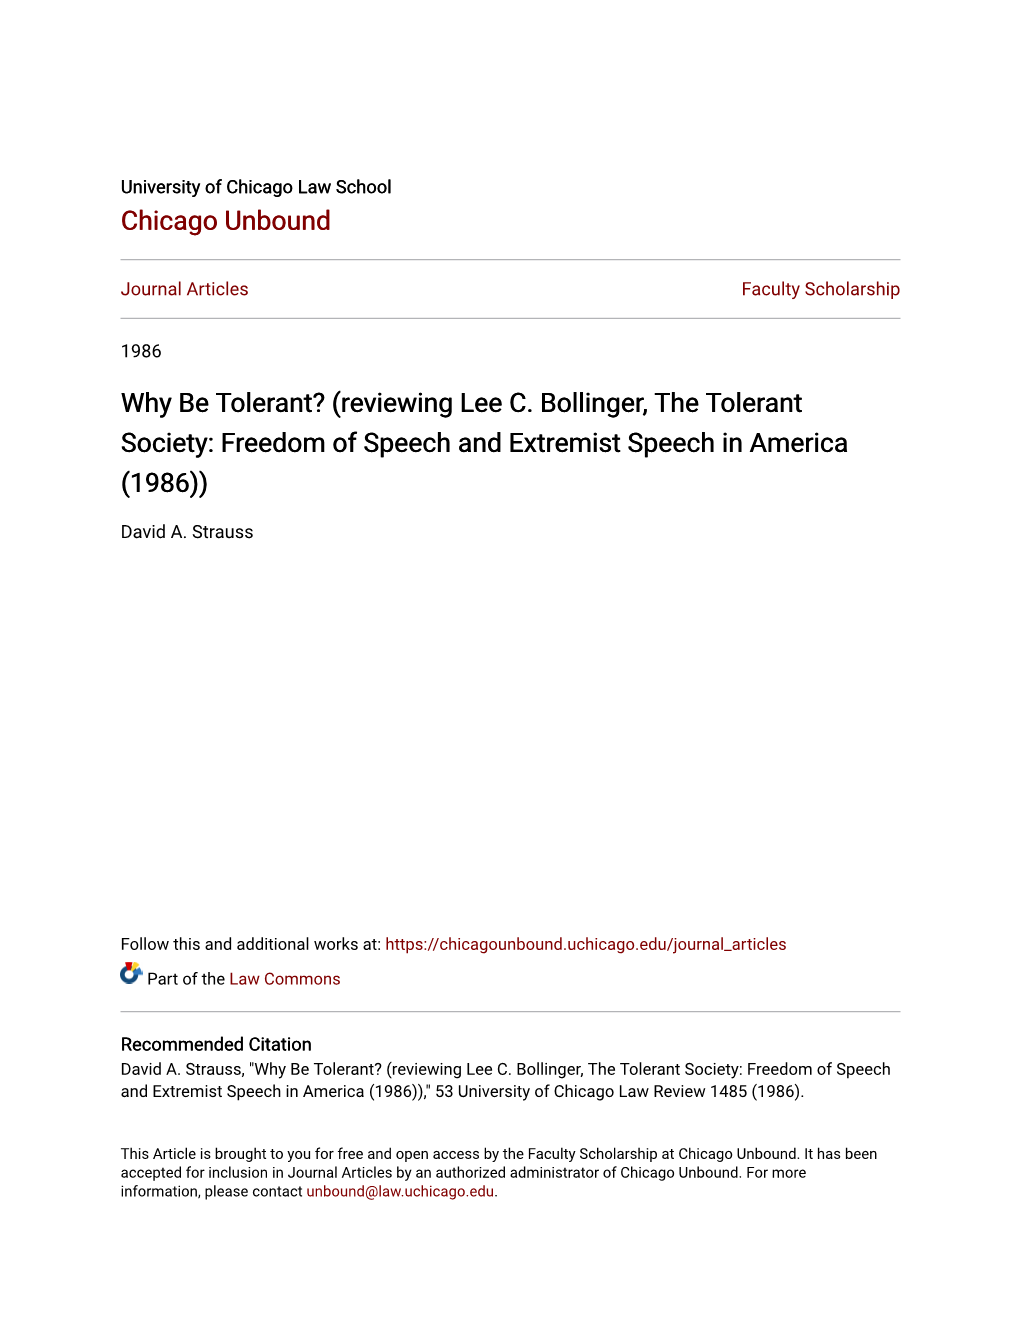 Reviewing Lee C. Bollinger, the Tolerant Society: Freedom of Speech and Extremist Speech in America (1986